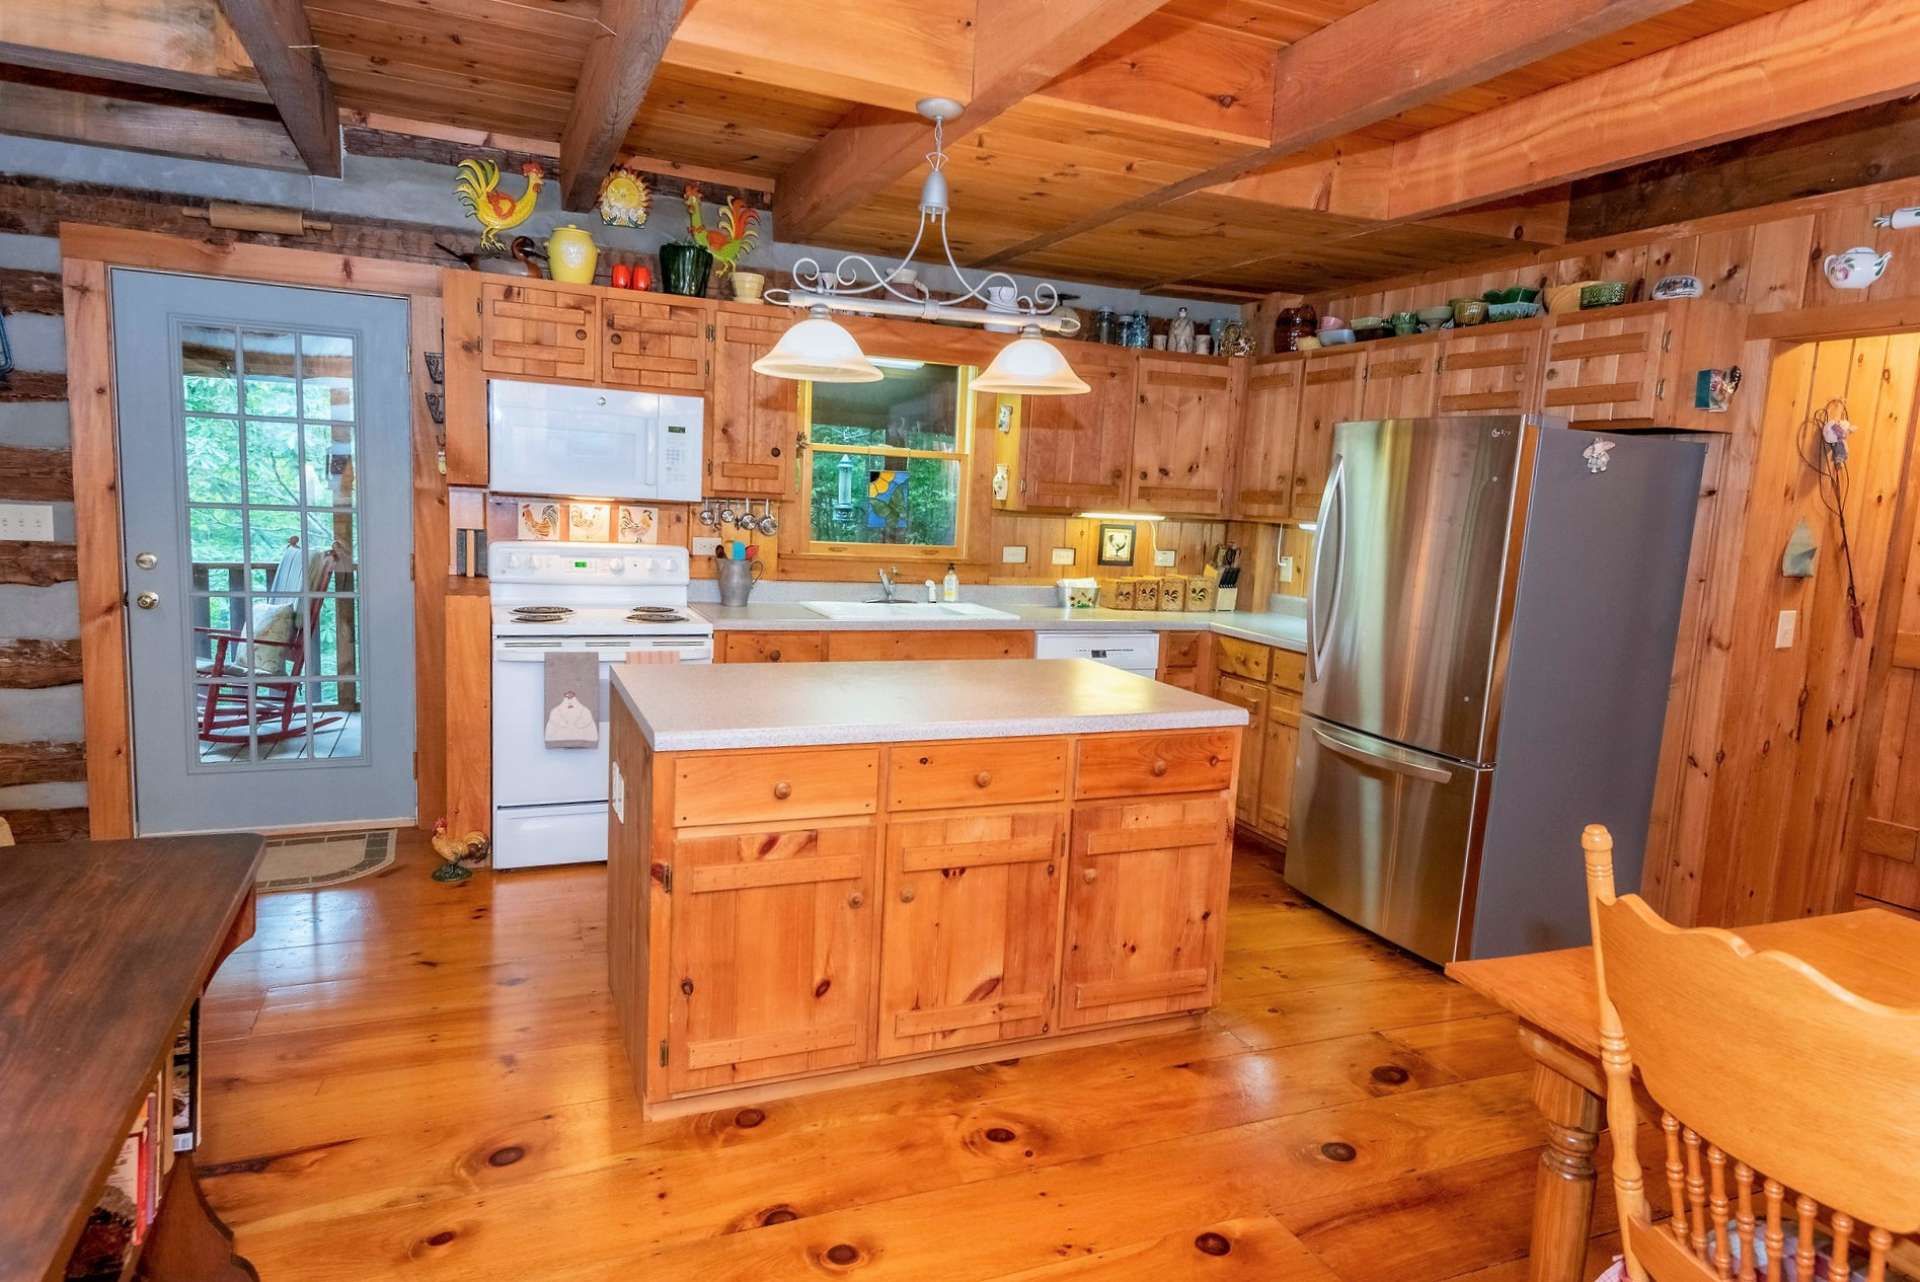 This cabin has a perfect layout for both full time living or a weekend mountain retreat.